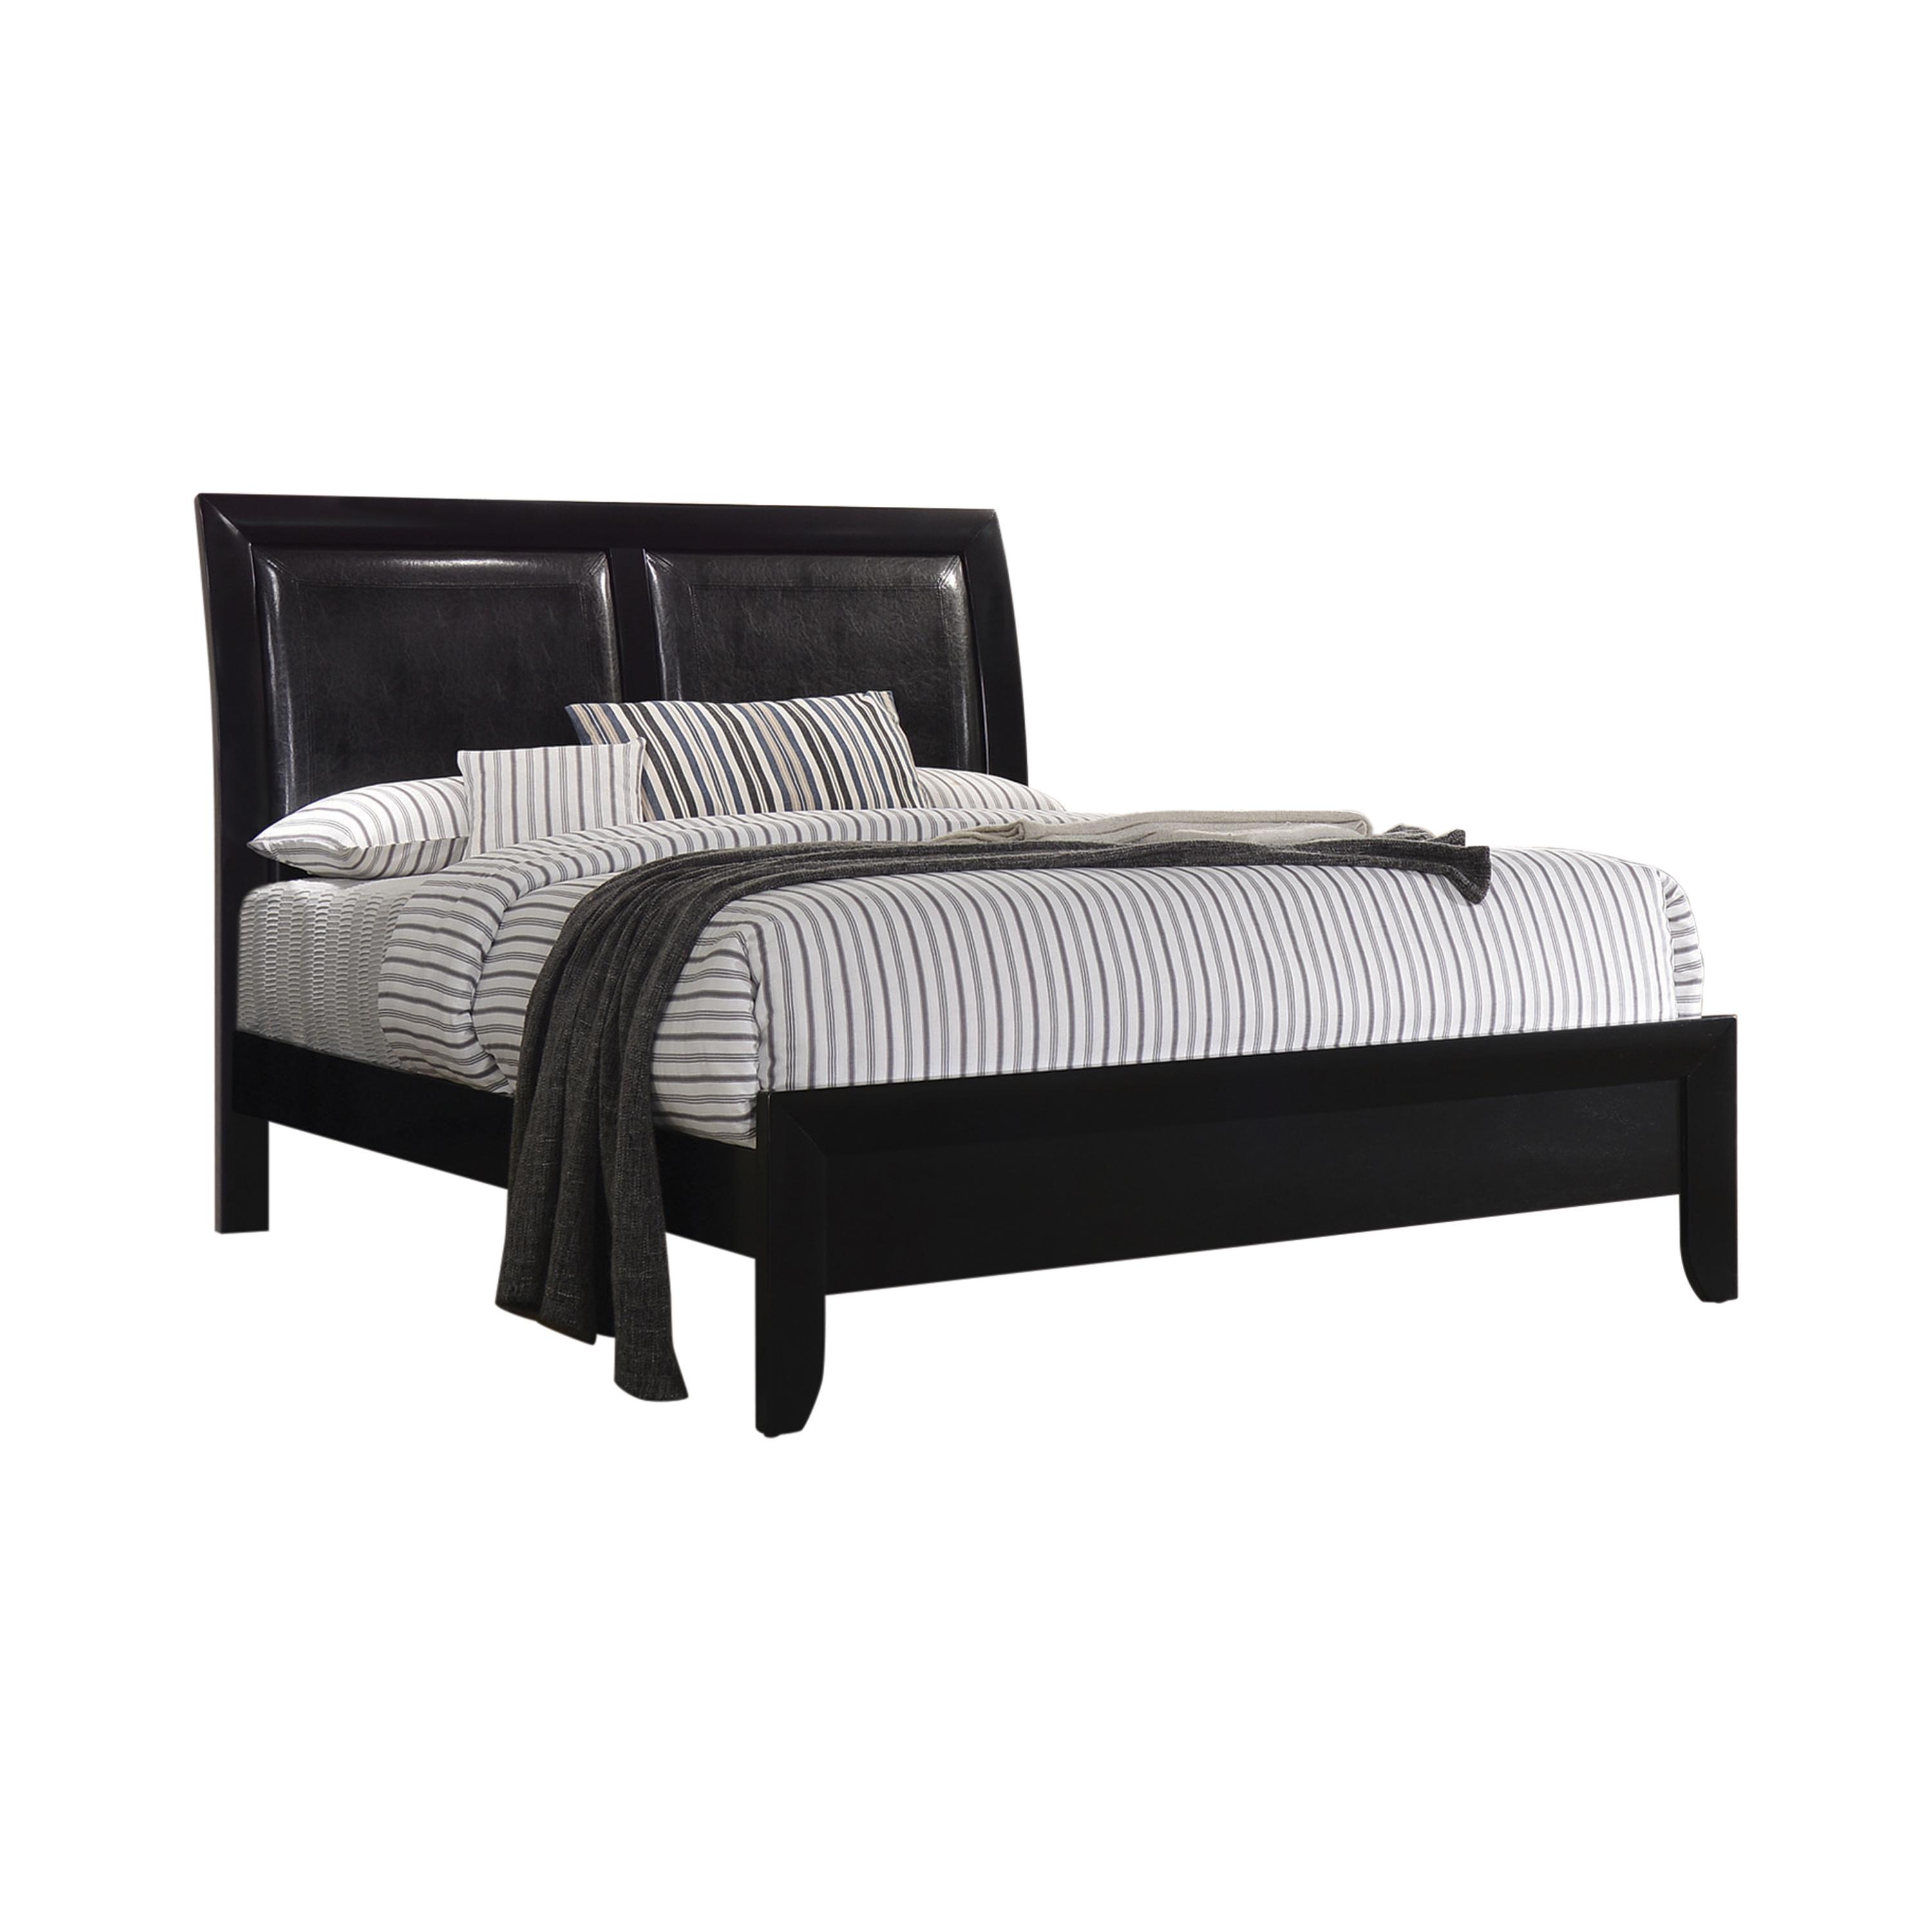 Transitional Bed 200701Q Briana 200701Q in Black Leatherette